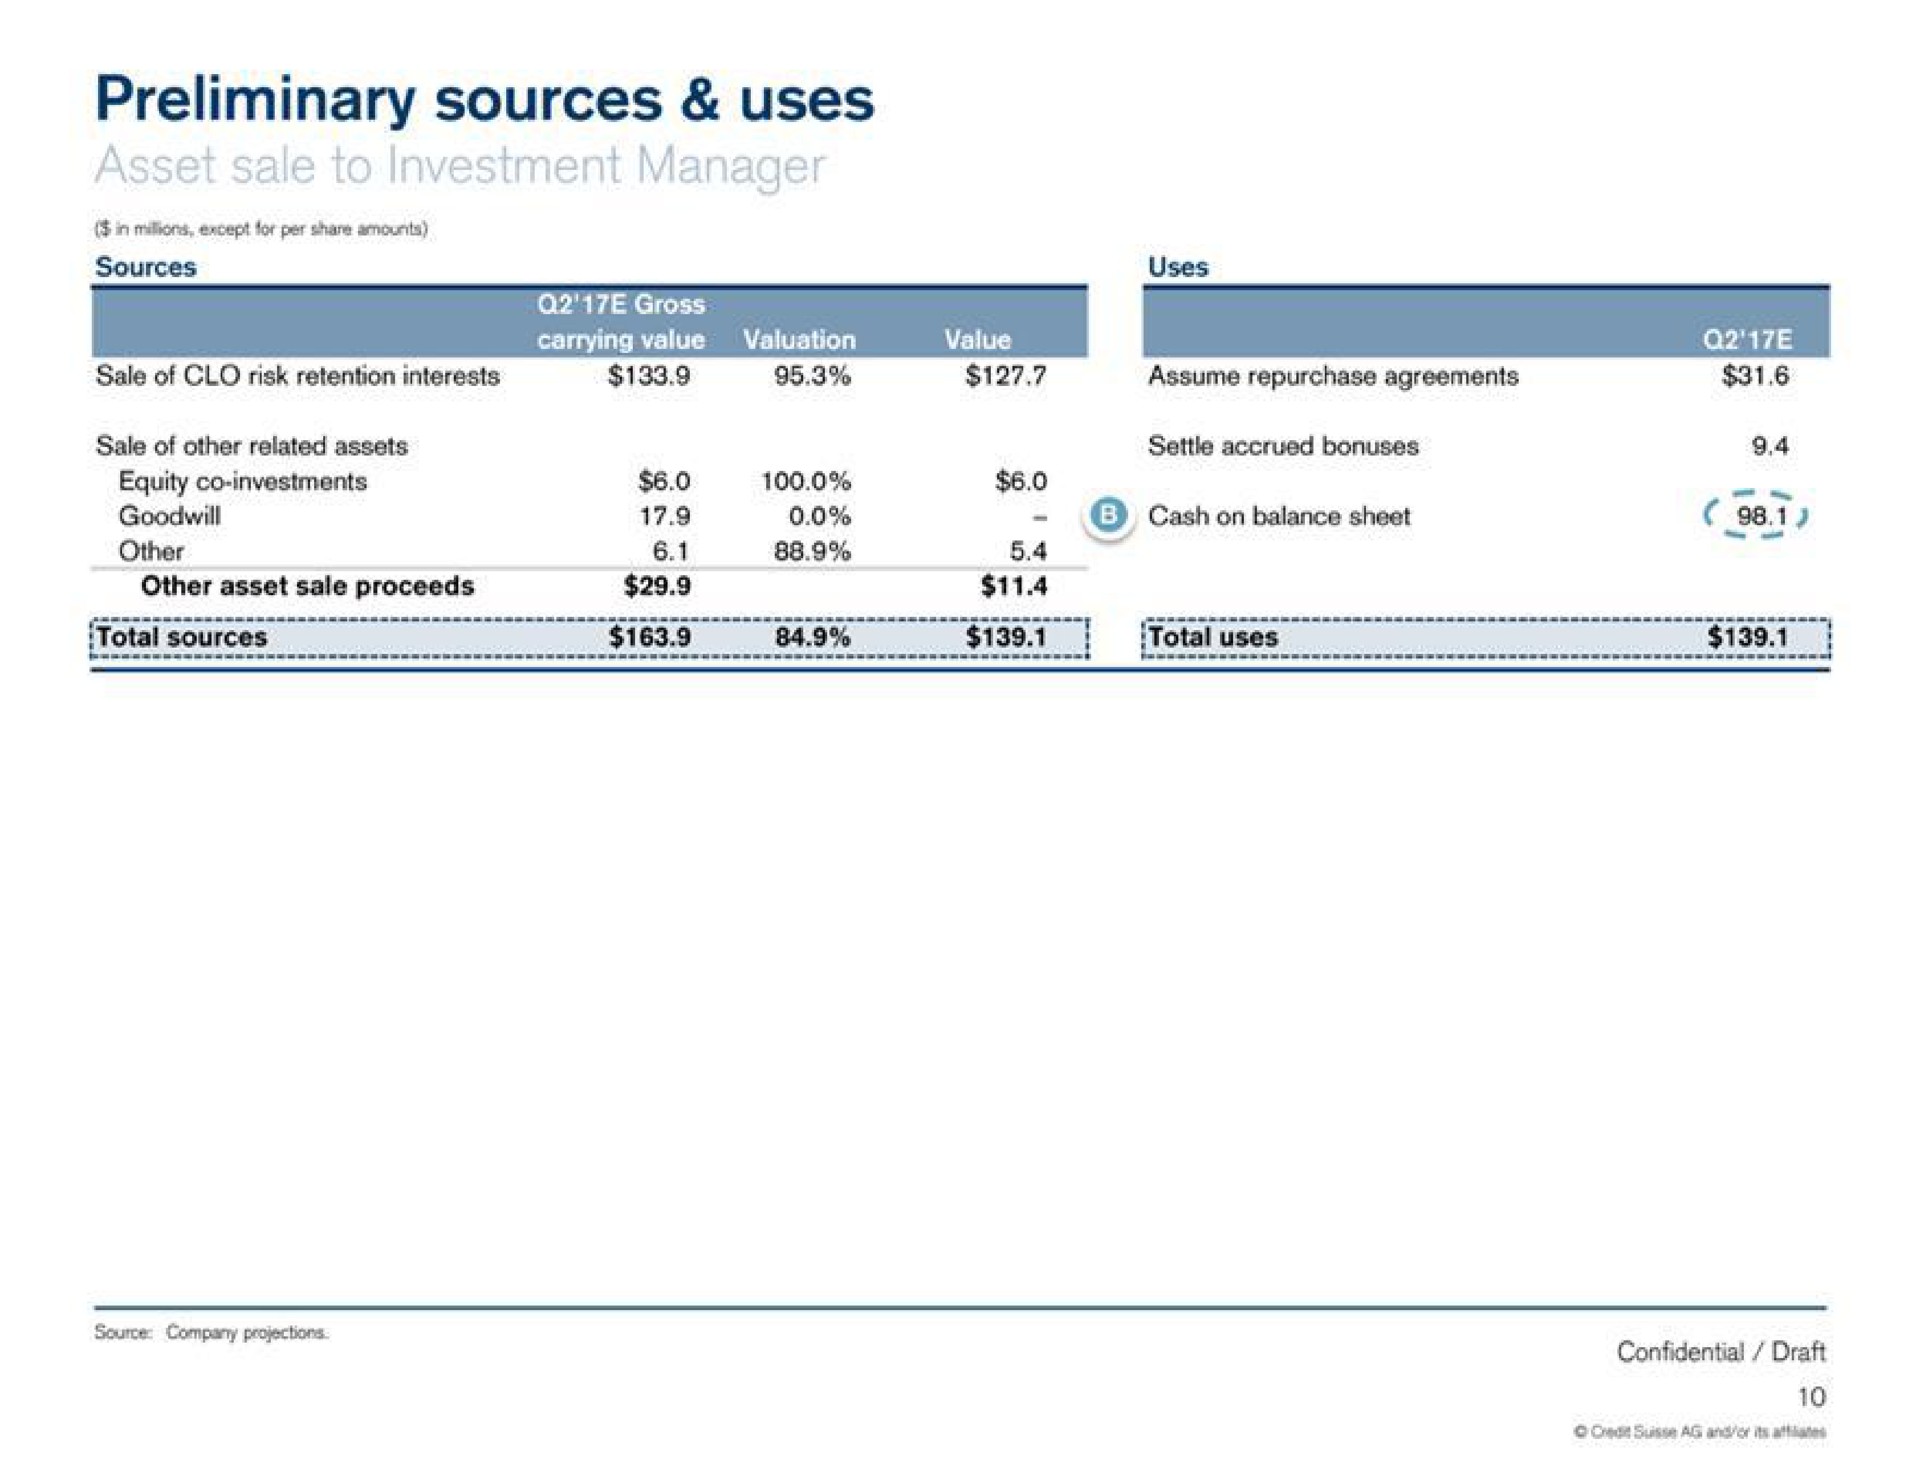 preliminary sources uses goodwill total sources cash on balance sheet total uses neon | Credit Suisse